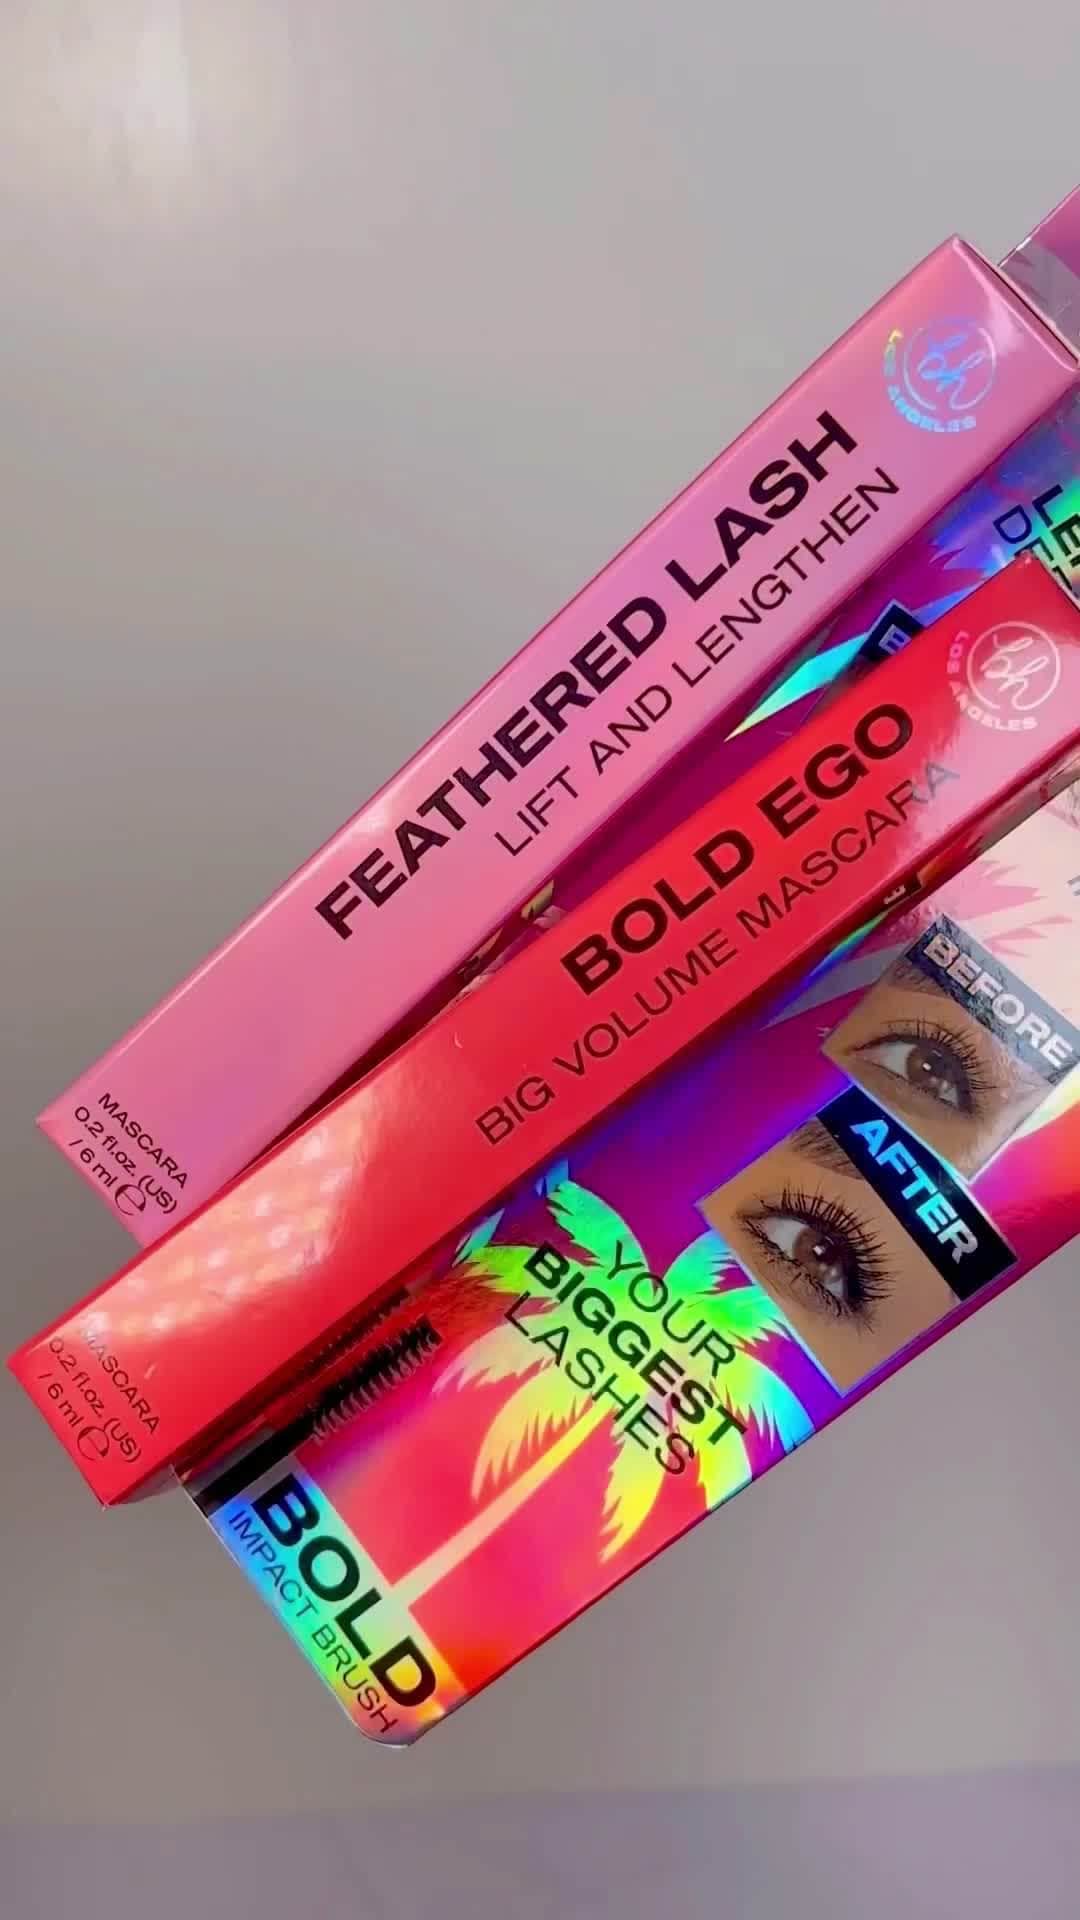 BH Cosmeticsのインスタグラム：「All eyes on NEW‼️ Who's snagged one of our ~latest and greatest~ mascaras?! Get all the deets below ⬇️⁣ 💗 Feathered Lash False Lash: Lifts, curls, defines, and lengthens lashes from root to tip​⁣⁣ ❤️ Bold Ego Mega Volume: Maximum volume and instant fullness for a salon finish that lasts​⁣⁣ ⁣⁣ PLUS, both mascaras are...👇👀⁣ ✨ Weightless, fast-drying, ultra black formula​⁣⁣ ✨ Have lasting smudge-proof, flake-proof, fallout-proof results for all day wear​⁣⁣ ✨ Vegan. Cruelty-Free. Clean Ingredients.​⁣⁣ ⁣⁣ #bhcosmetics」